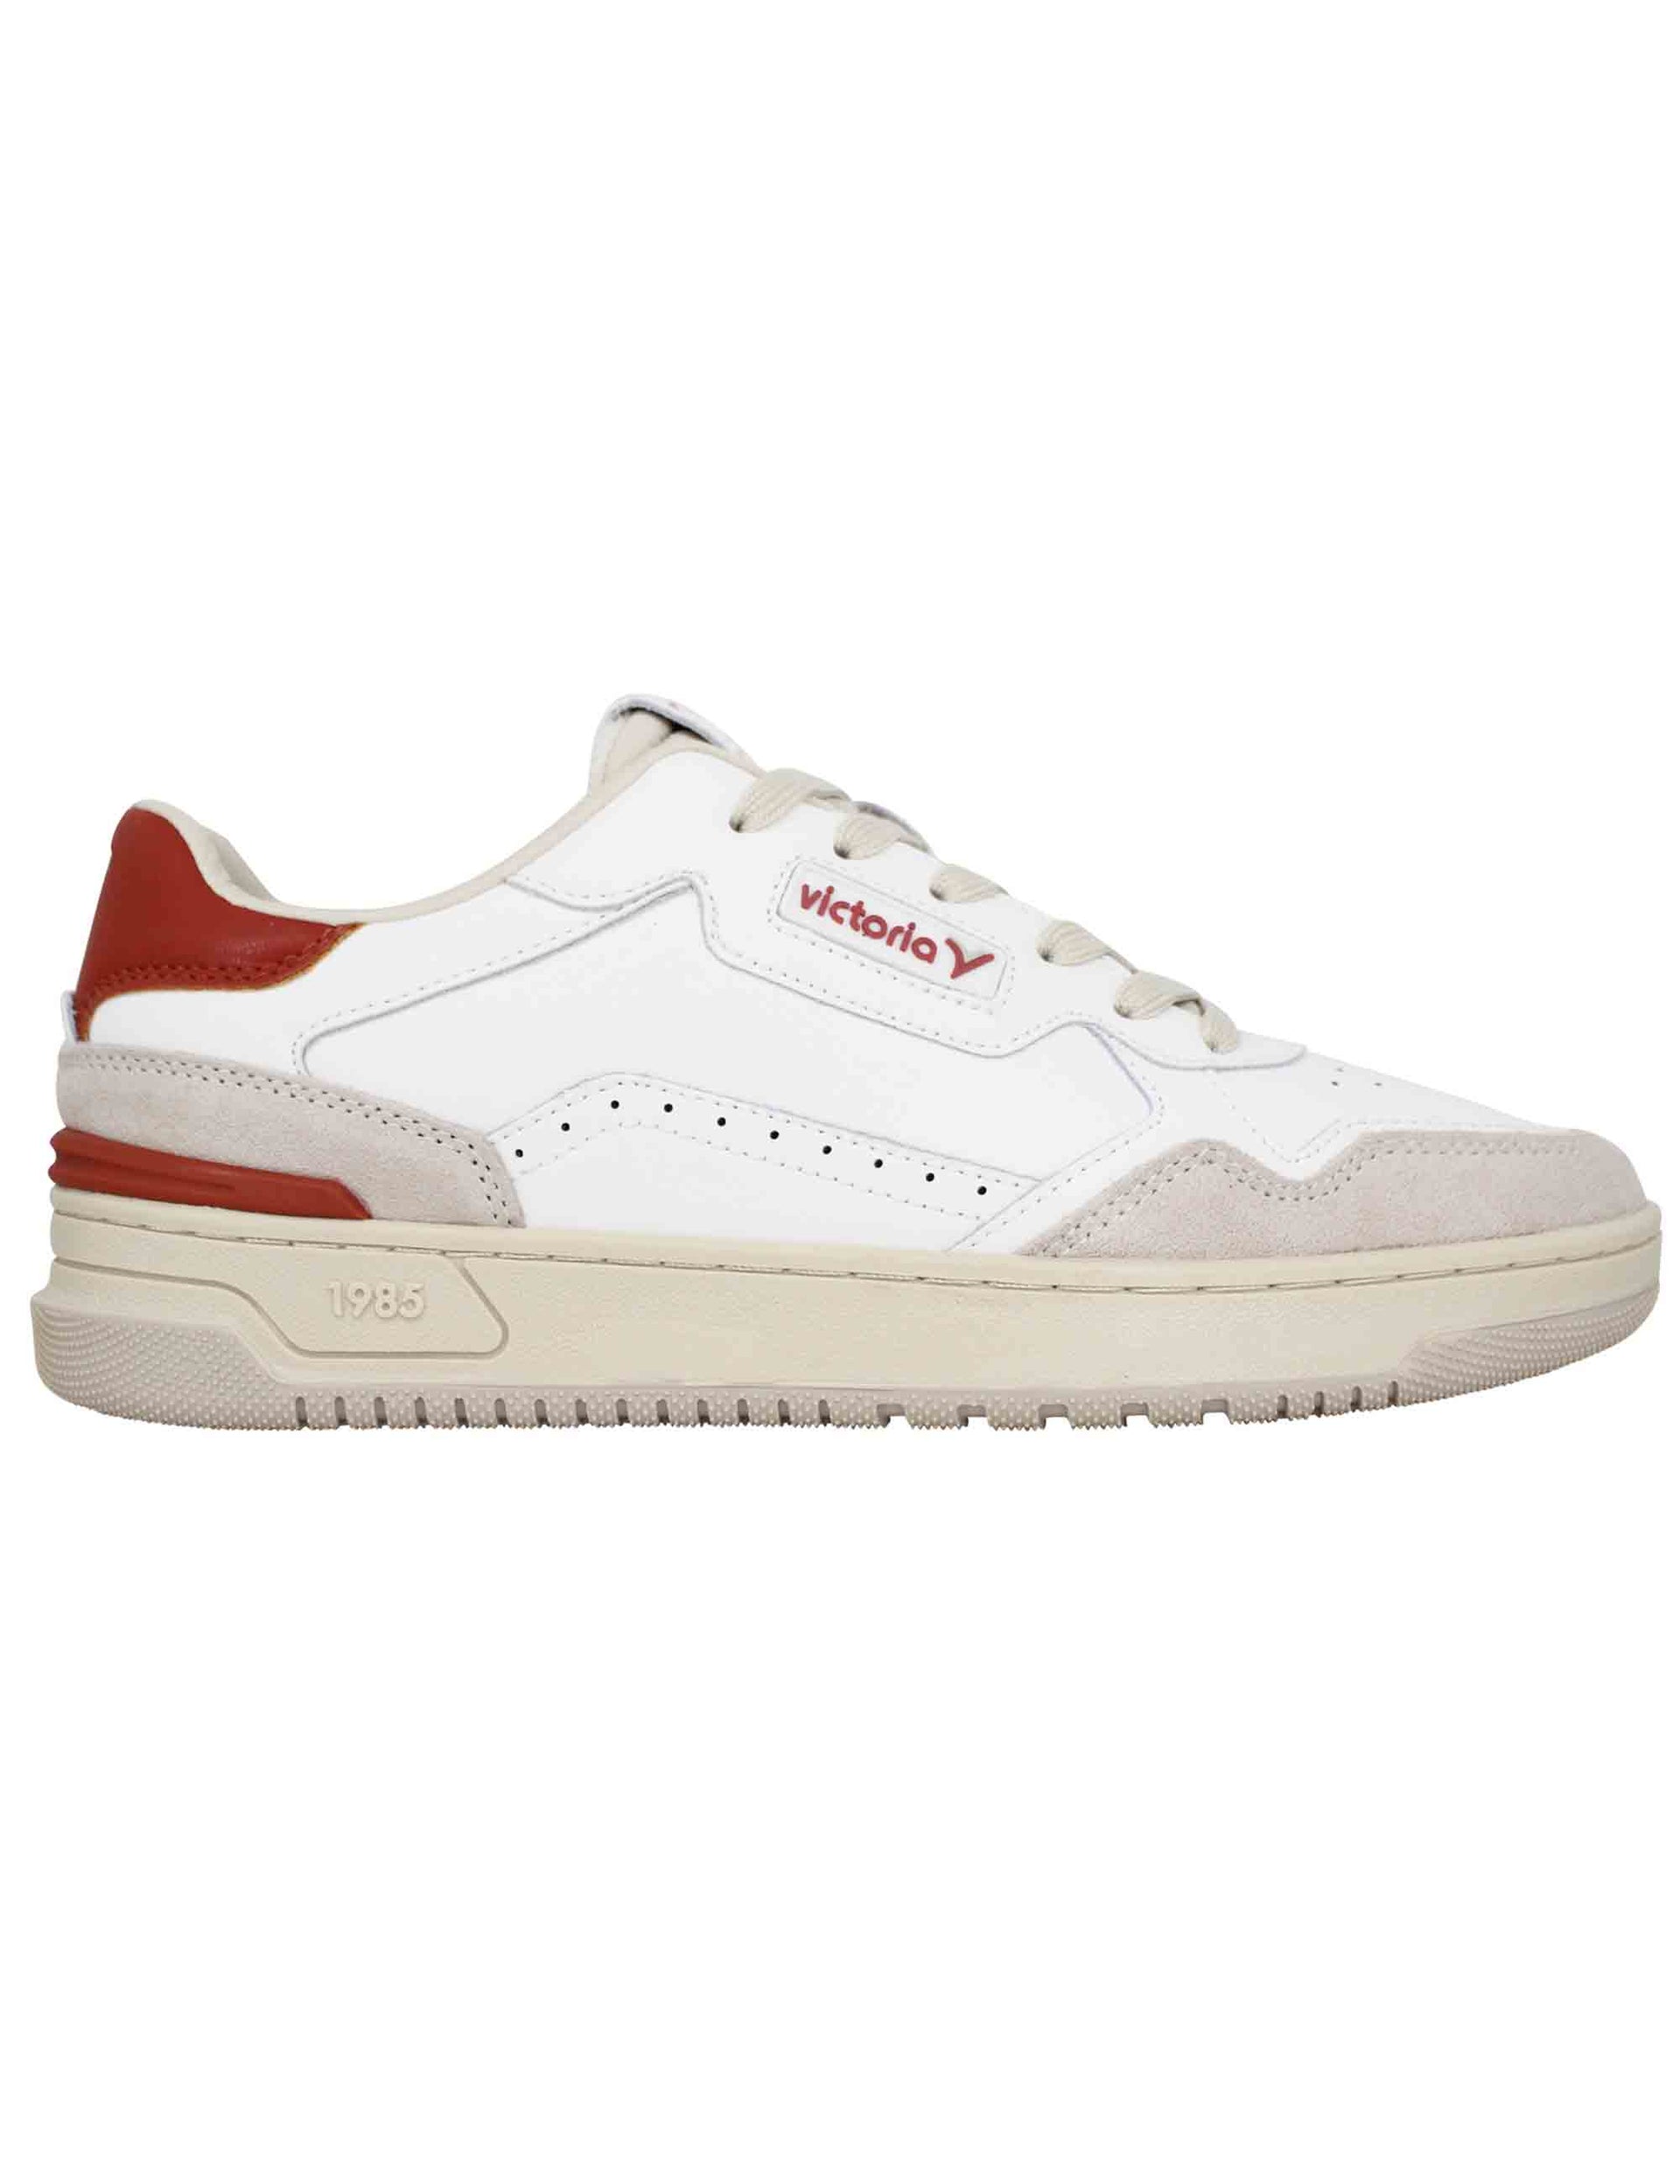 Men's sneakers in white leather with red inserts